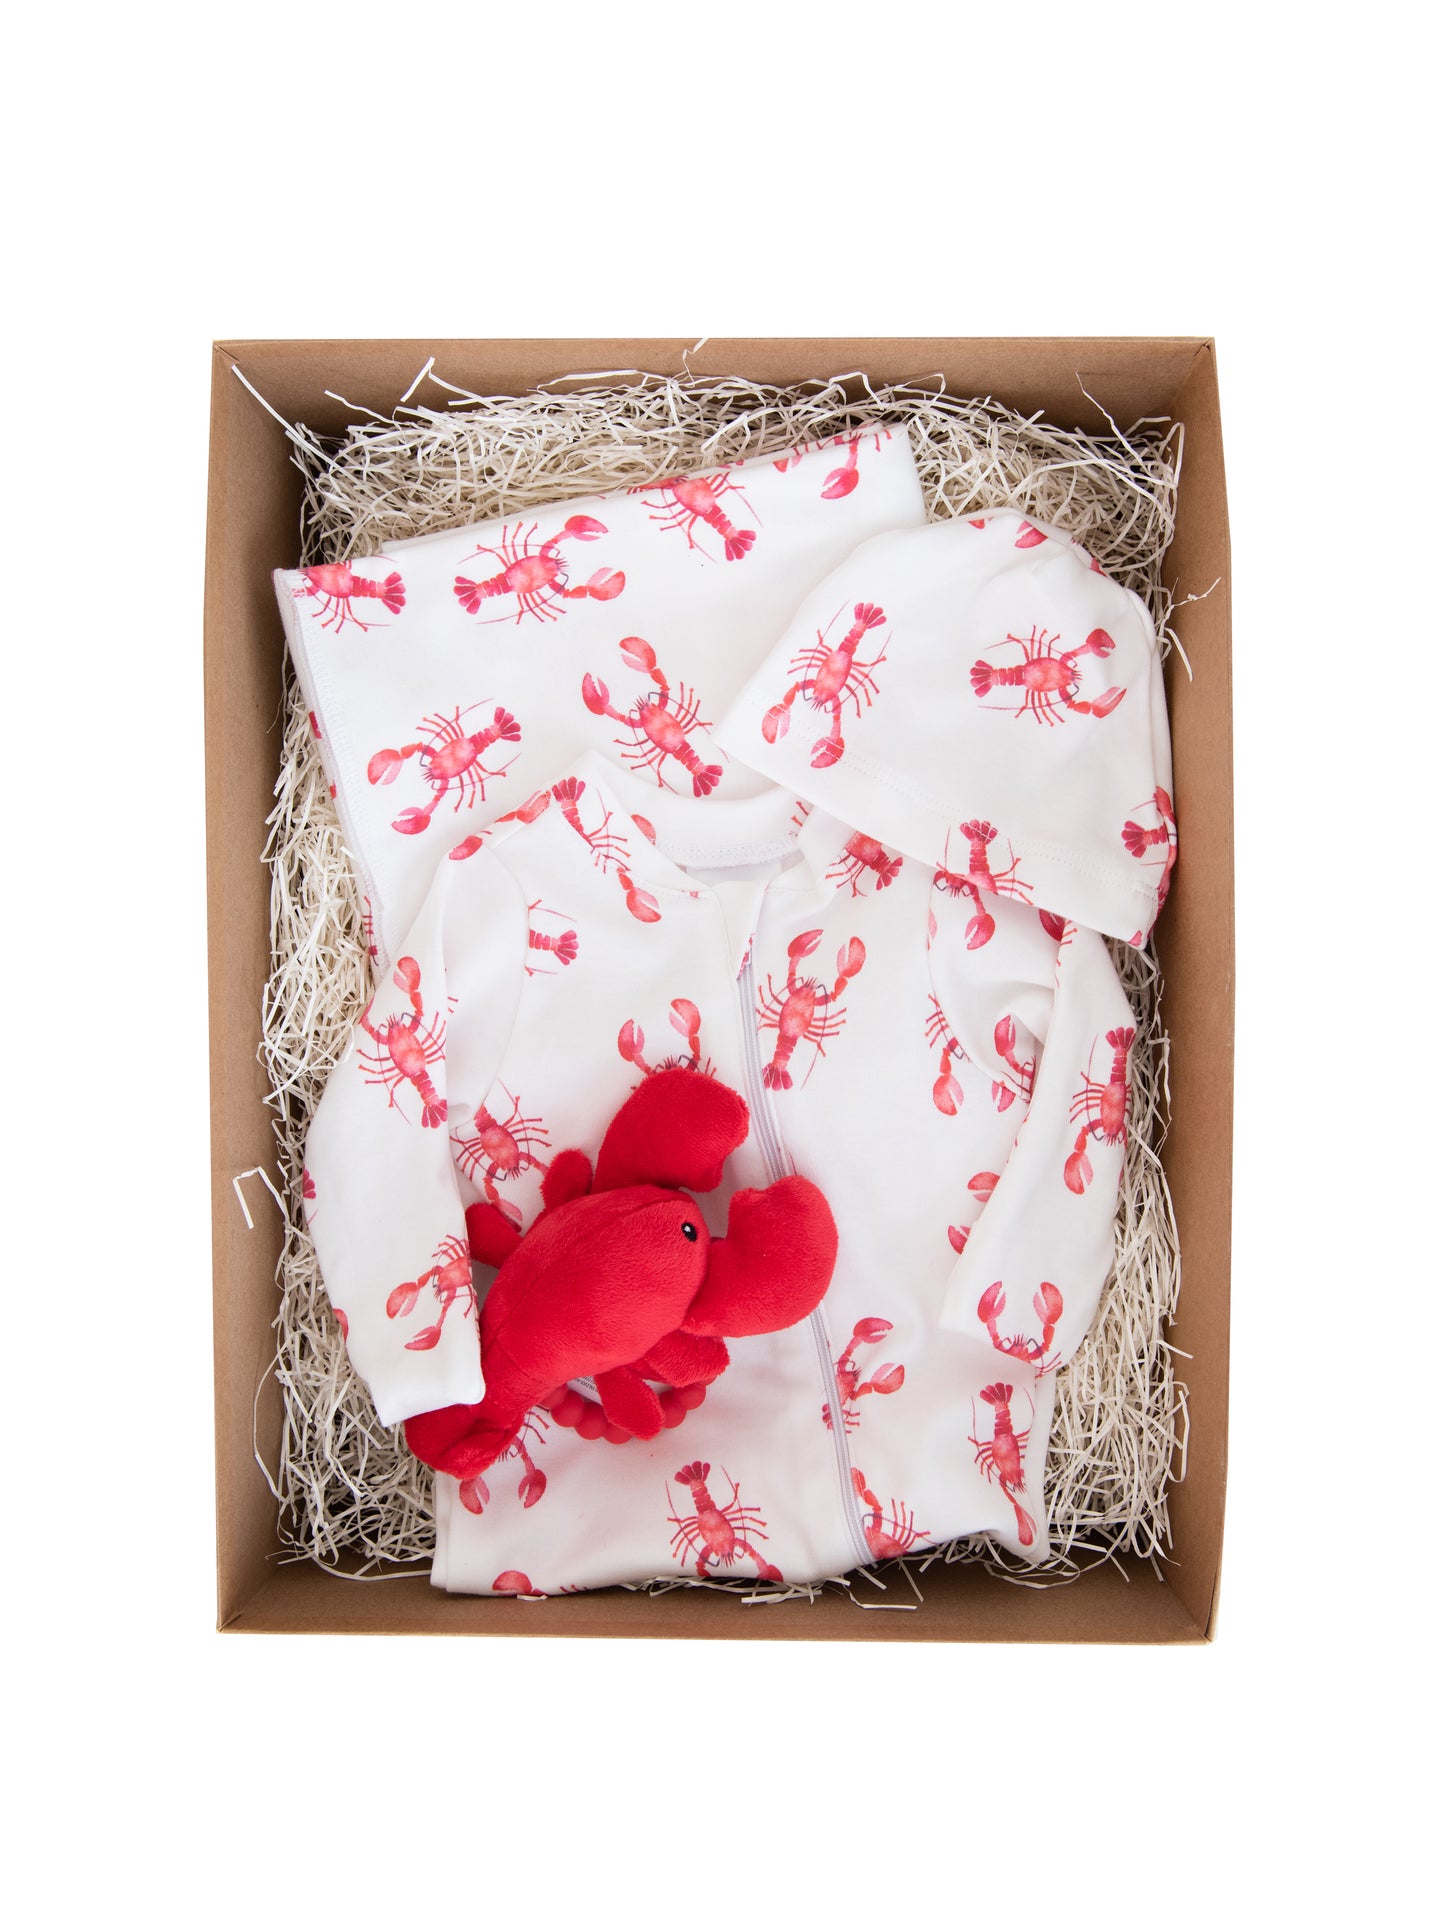 WT Lobster Baby Gift Box Weston Table 